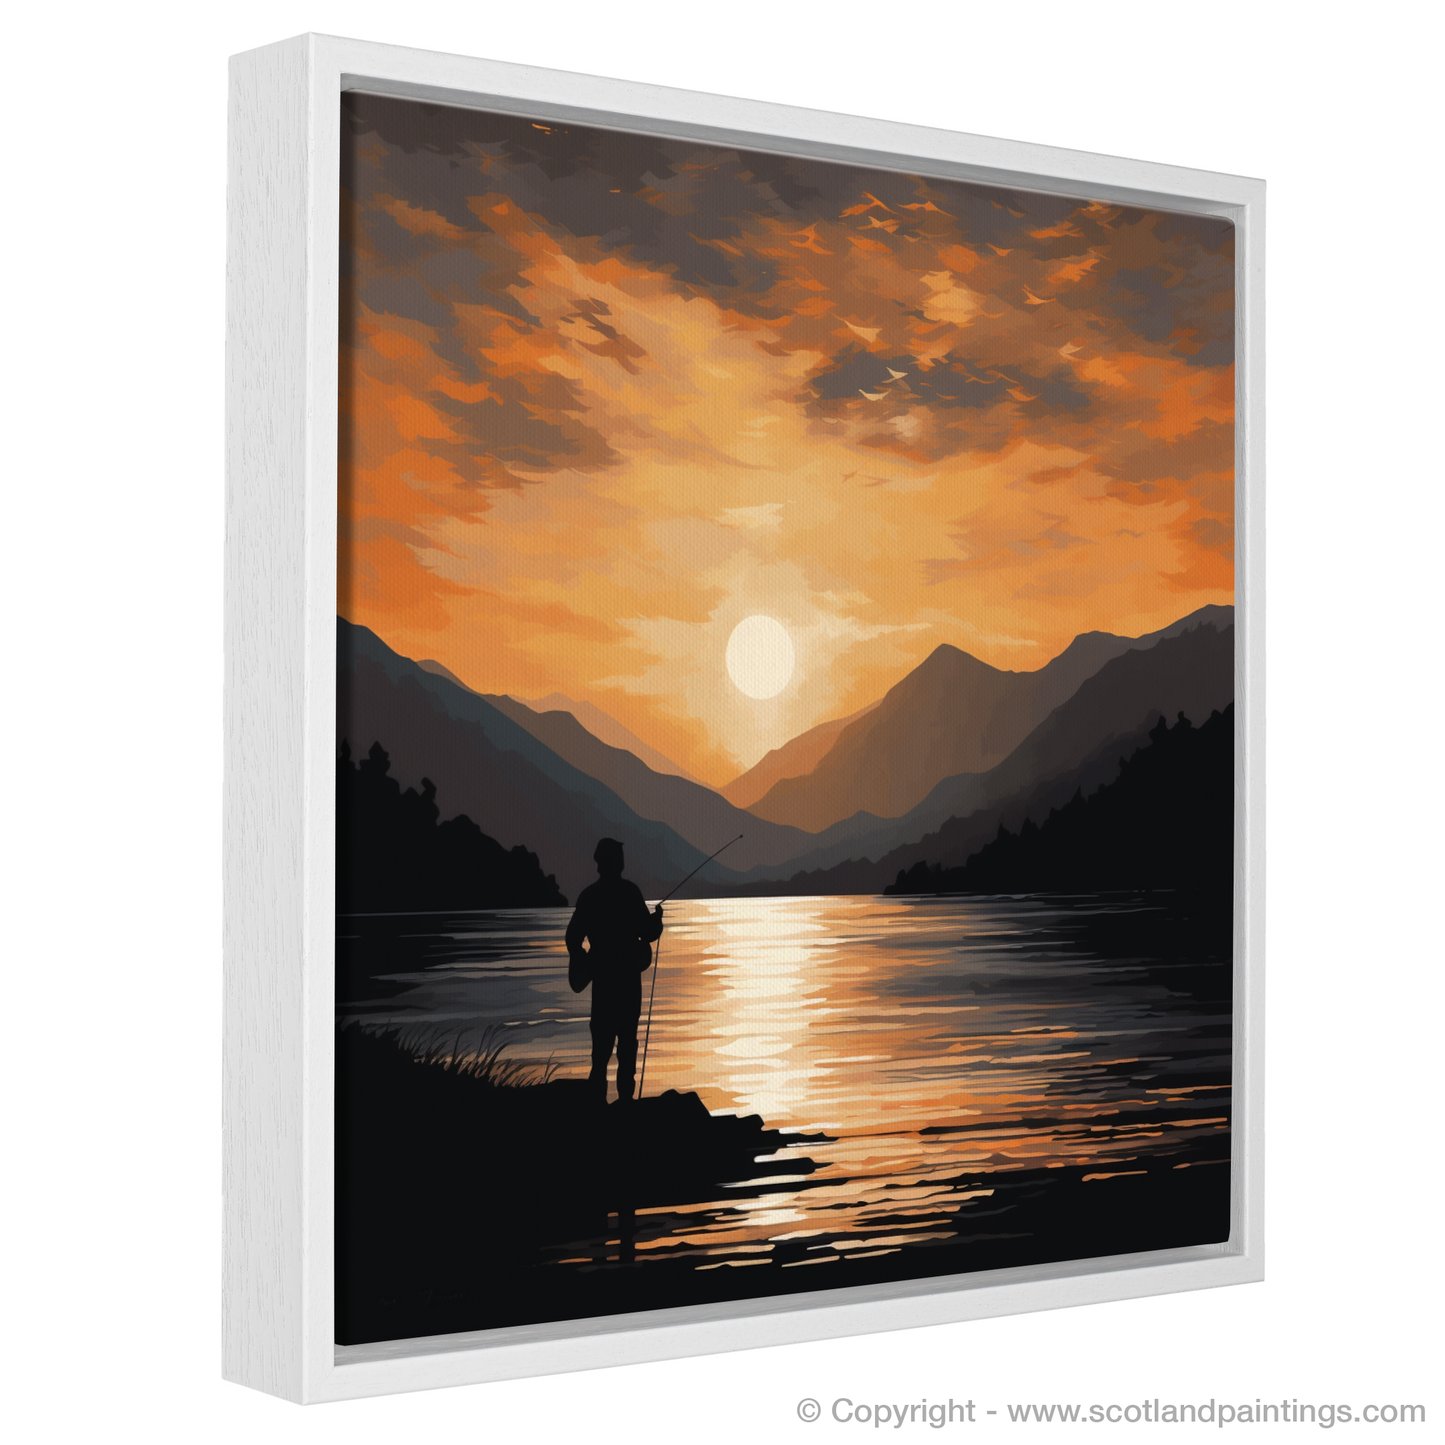 Painting and Art Print of Silhouetted fisherman on Loch Lomond entitled "Sunset Solitude: A Fisherman's Tale on Loch Lomond".